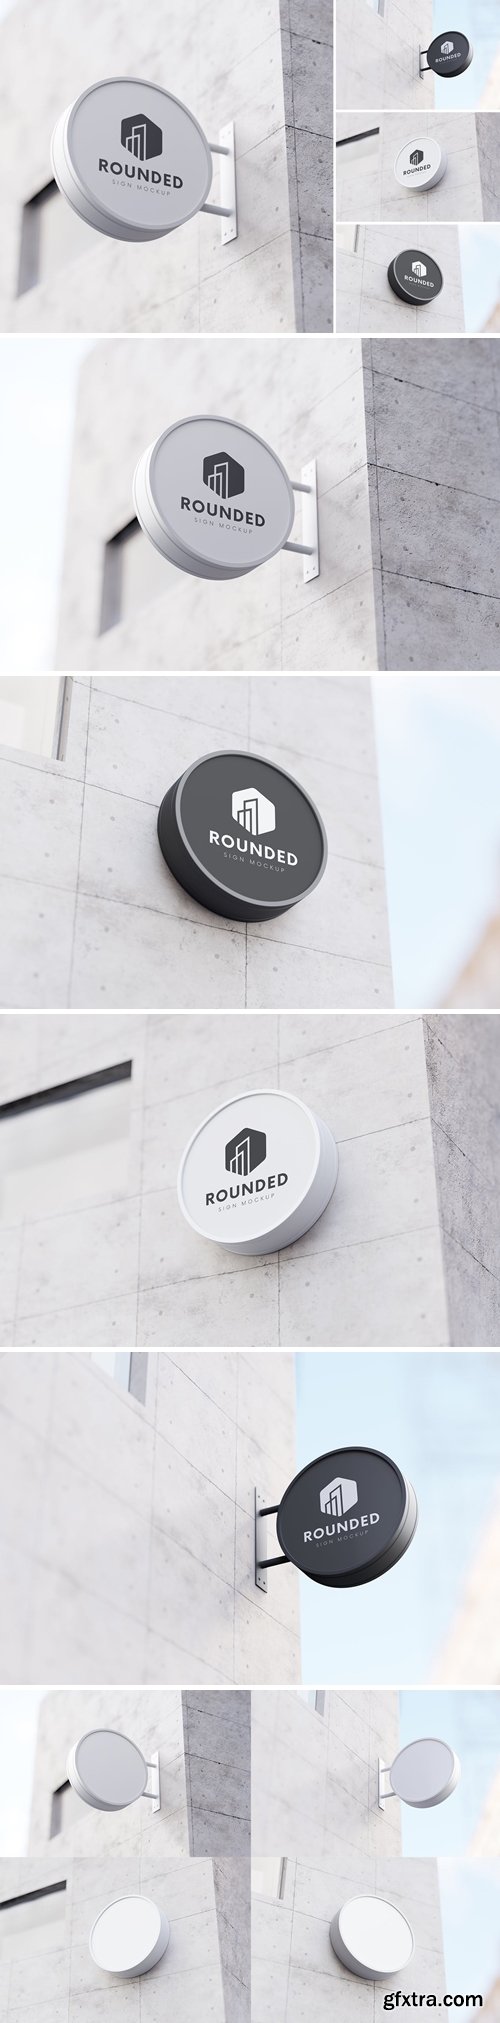 Round Wall Mounted Sign Mockups